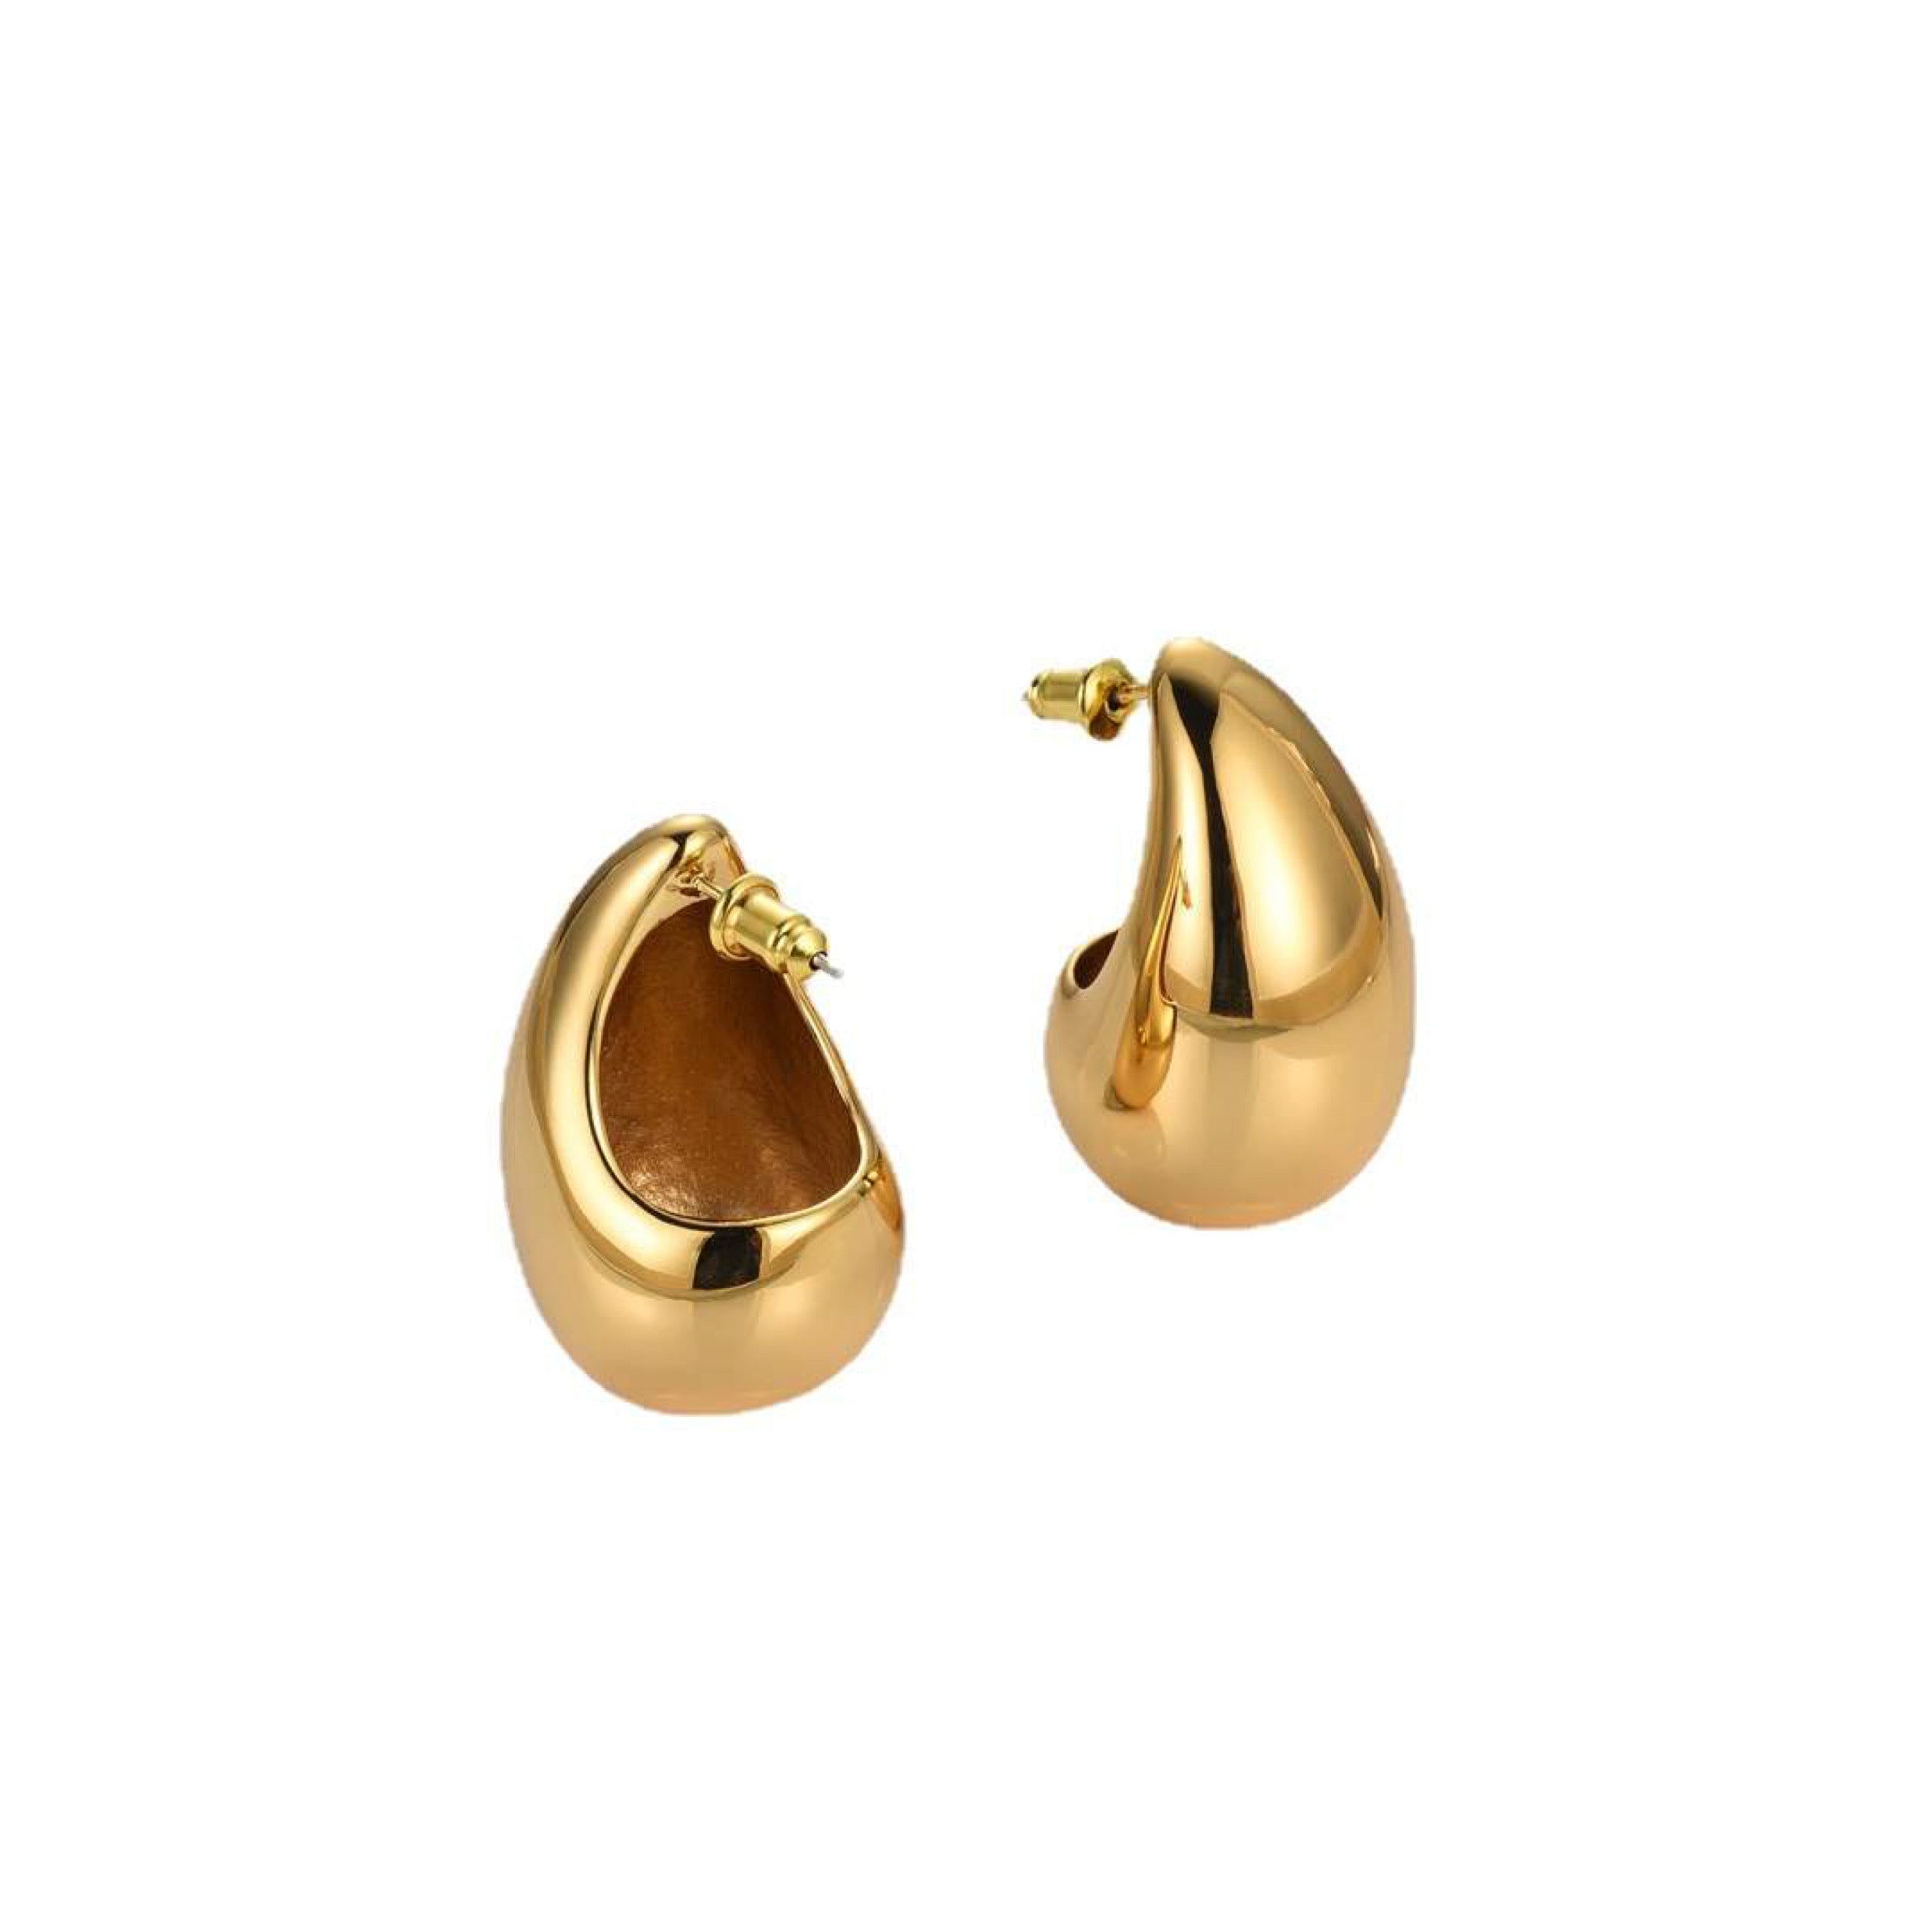 GOLDxTEAL gold plated drop earrings.